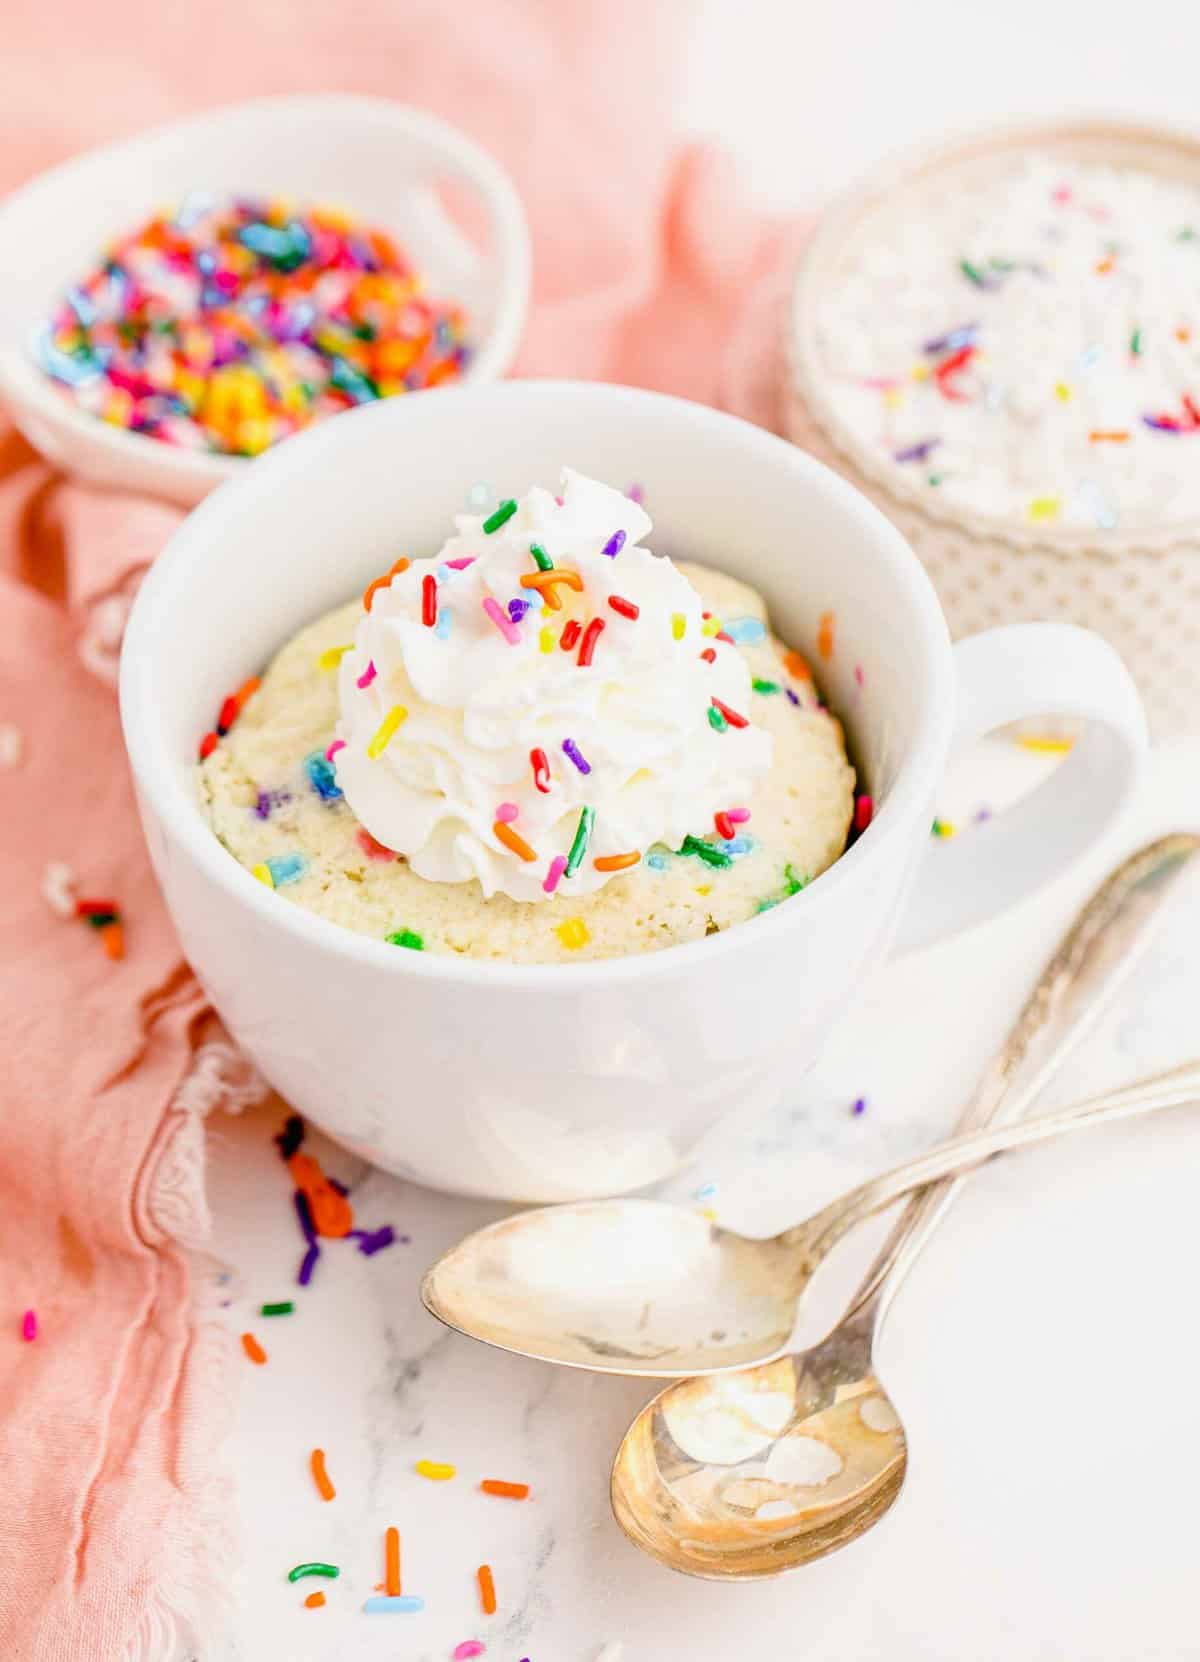 Mug of funfetti cake with dollop of whipped cream and sprinkles on top, pictured with two spoons